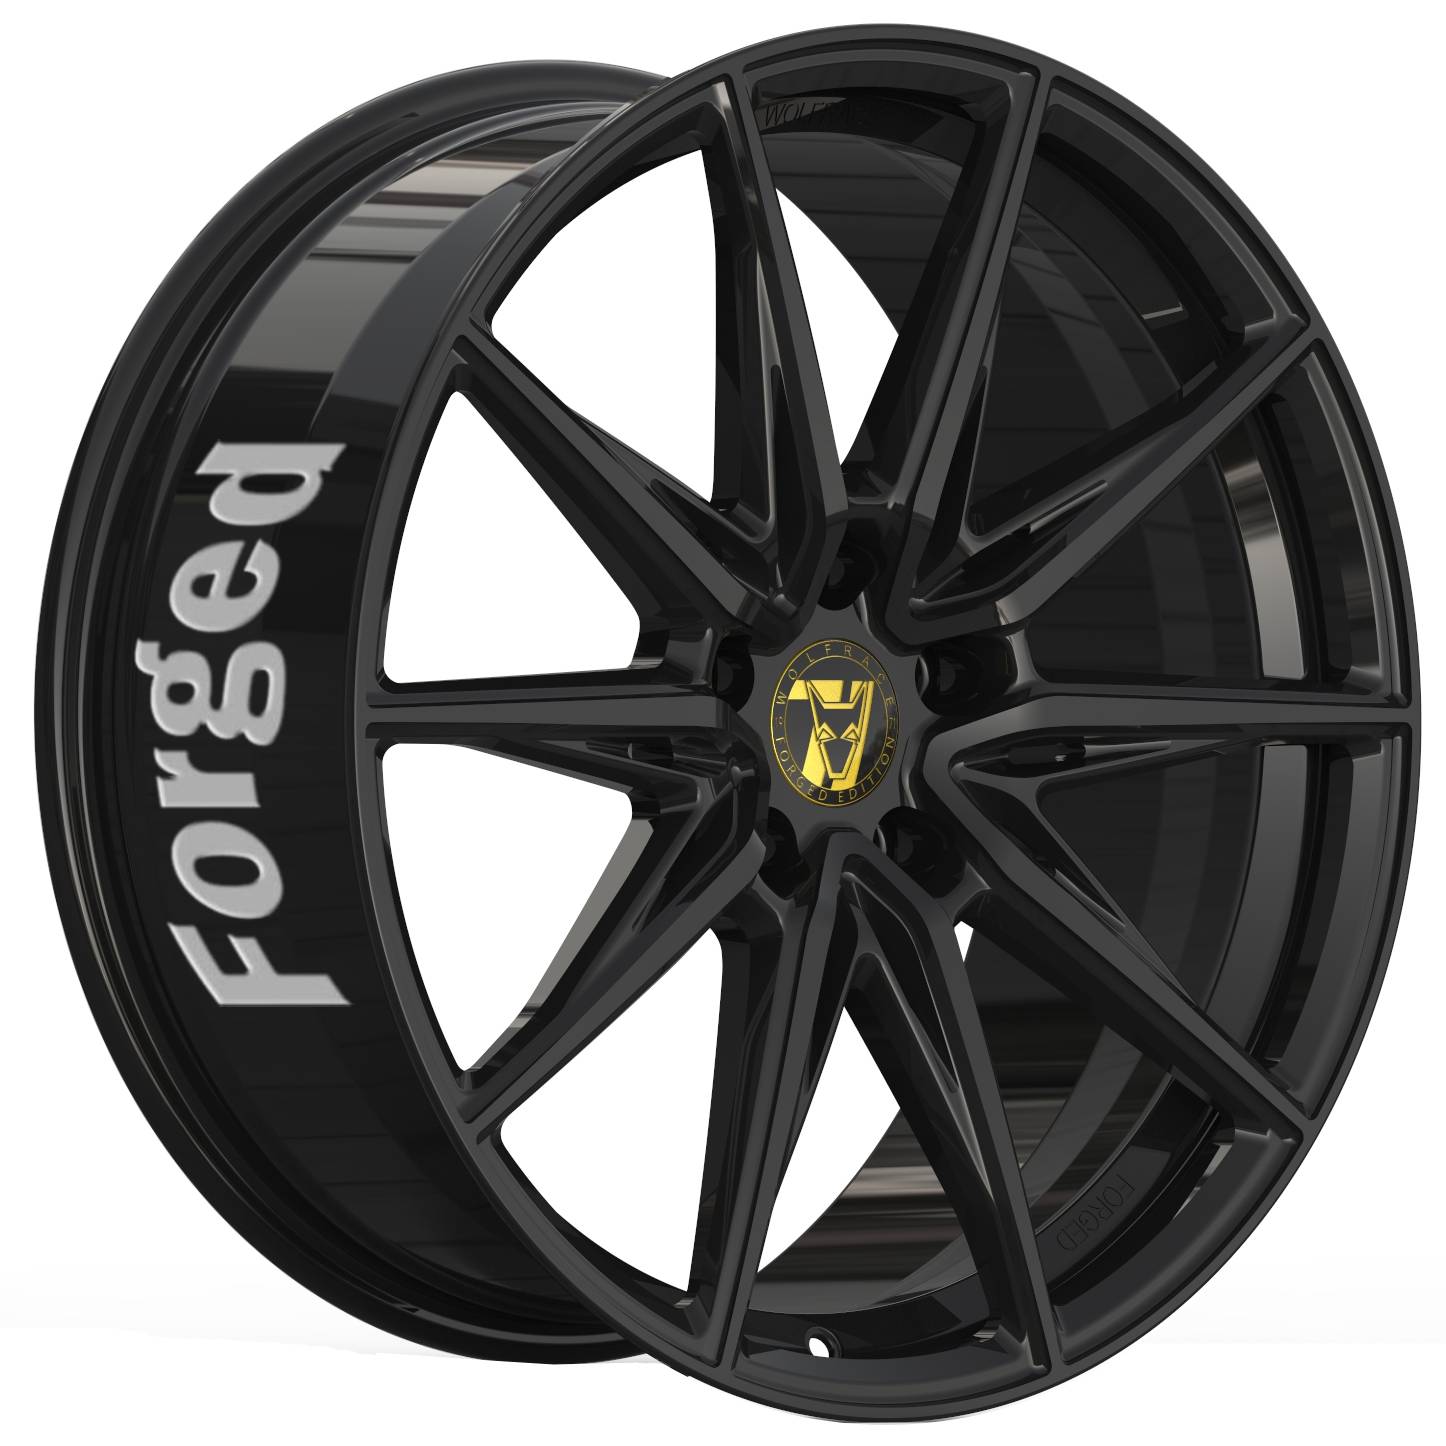 Demon Wheels 71 Forged Edition Urban Racer Forged [10x23] -5x114.3- ET 30